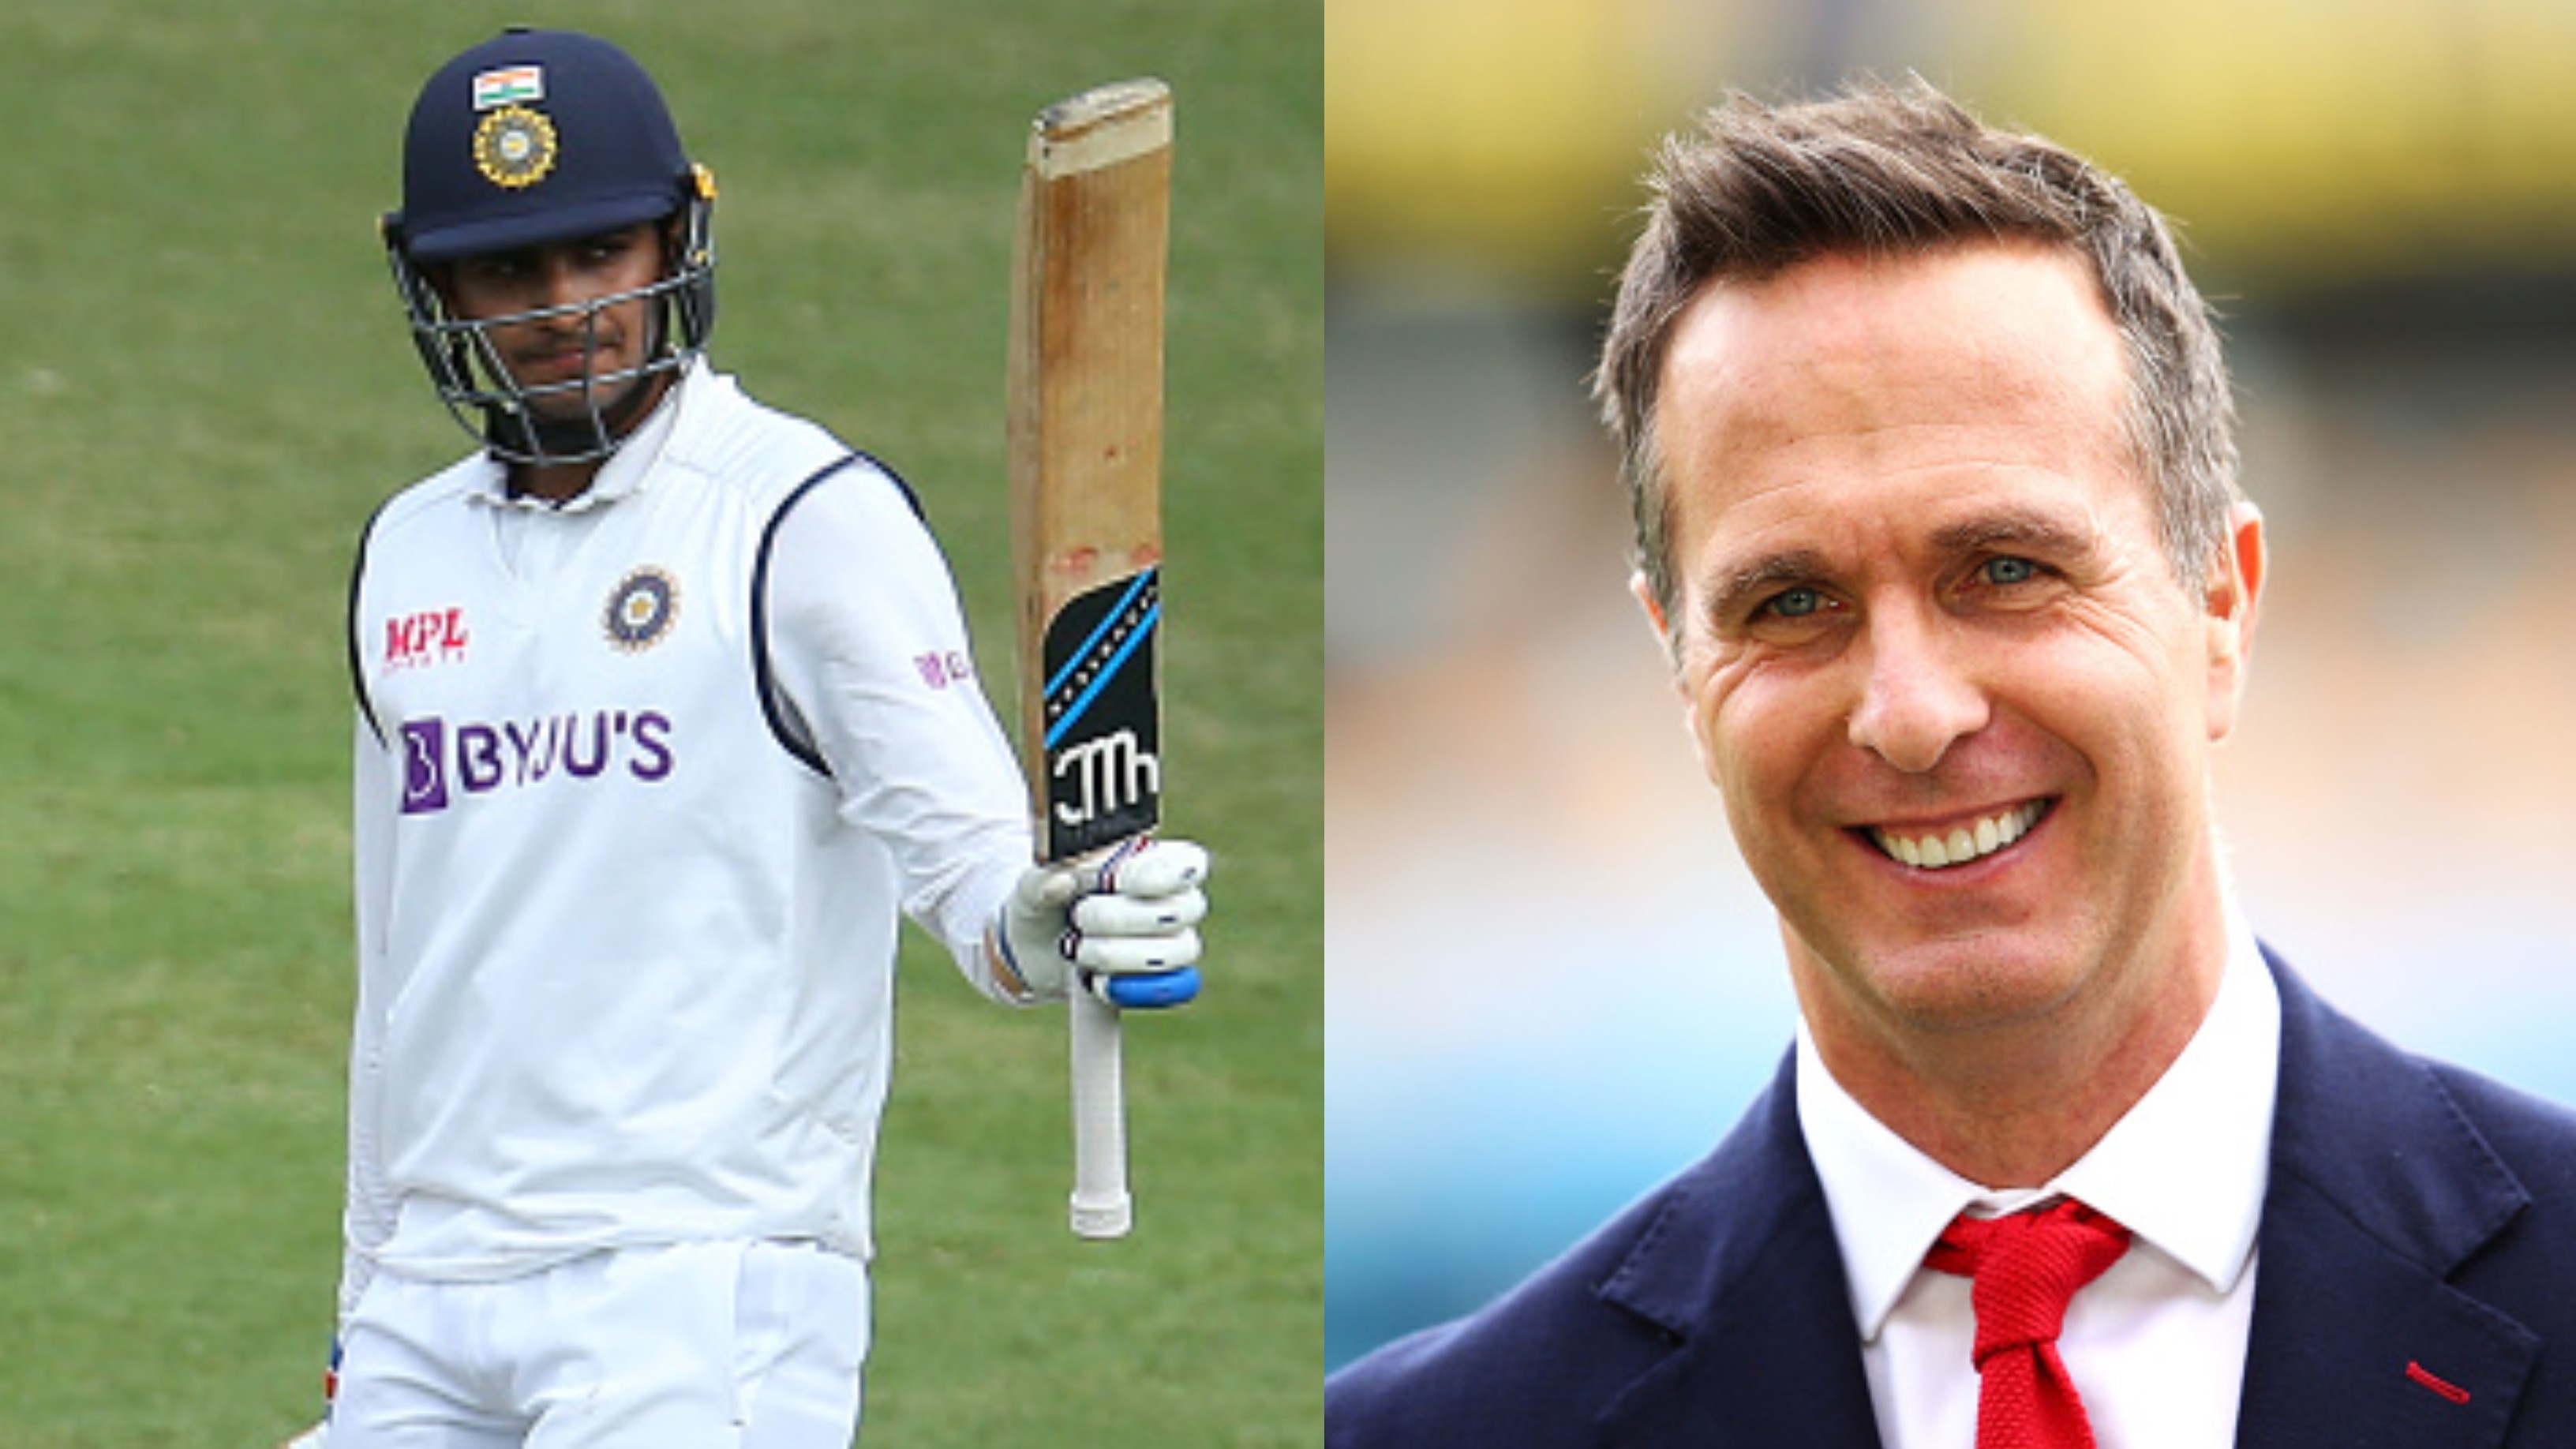 AUS v IND 2020-21: Michael Vaughan predicts Shubman Gill is the next big thing in Test Cricket